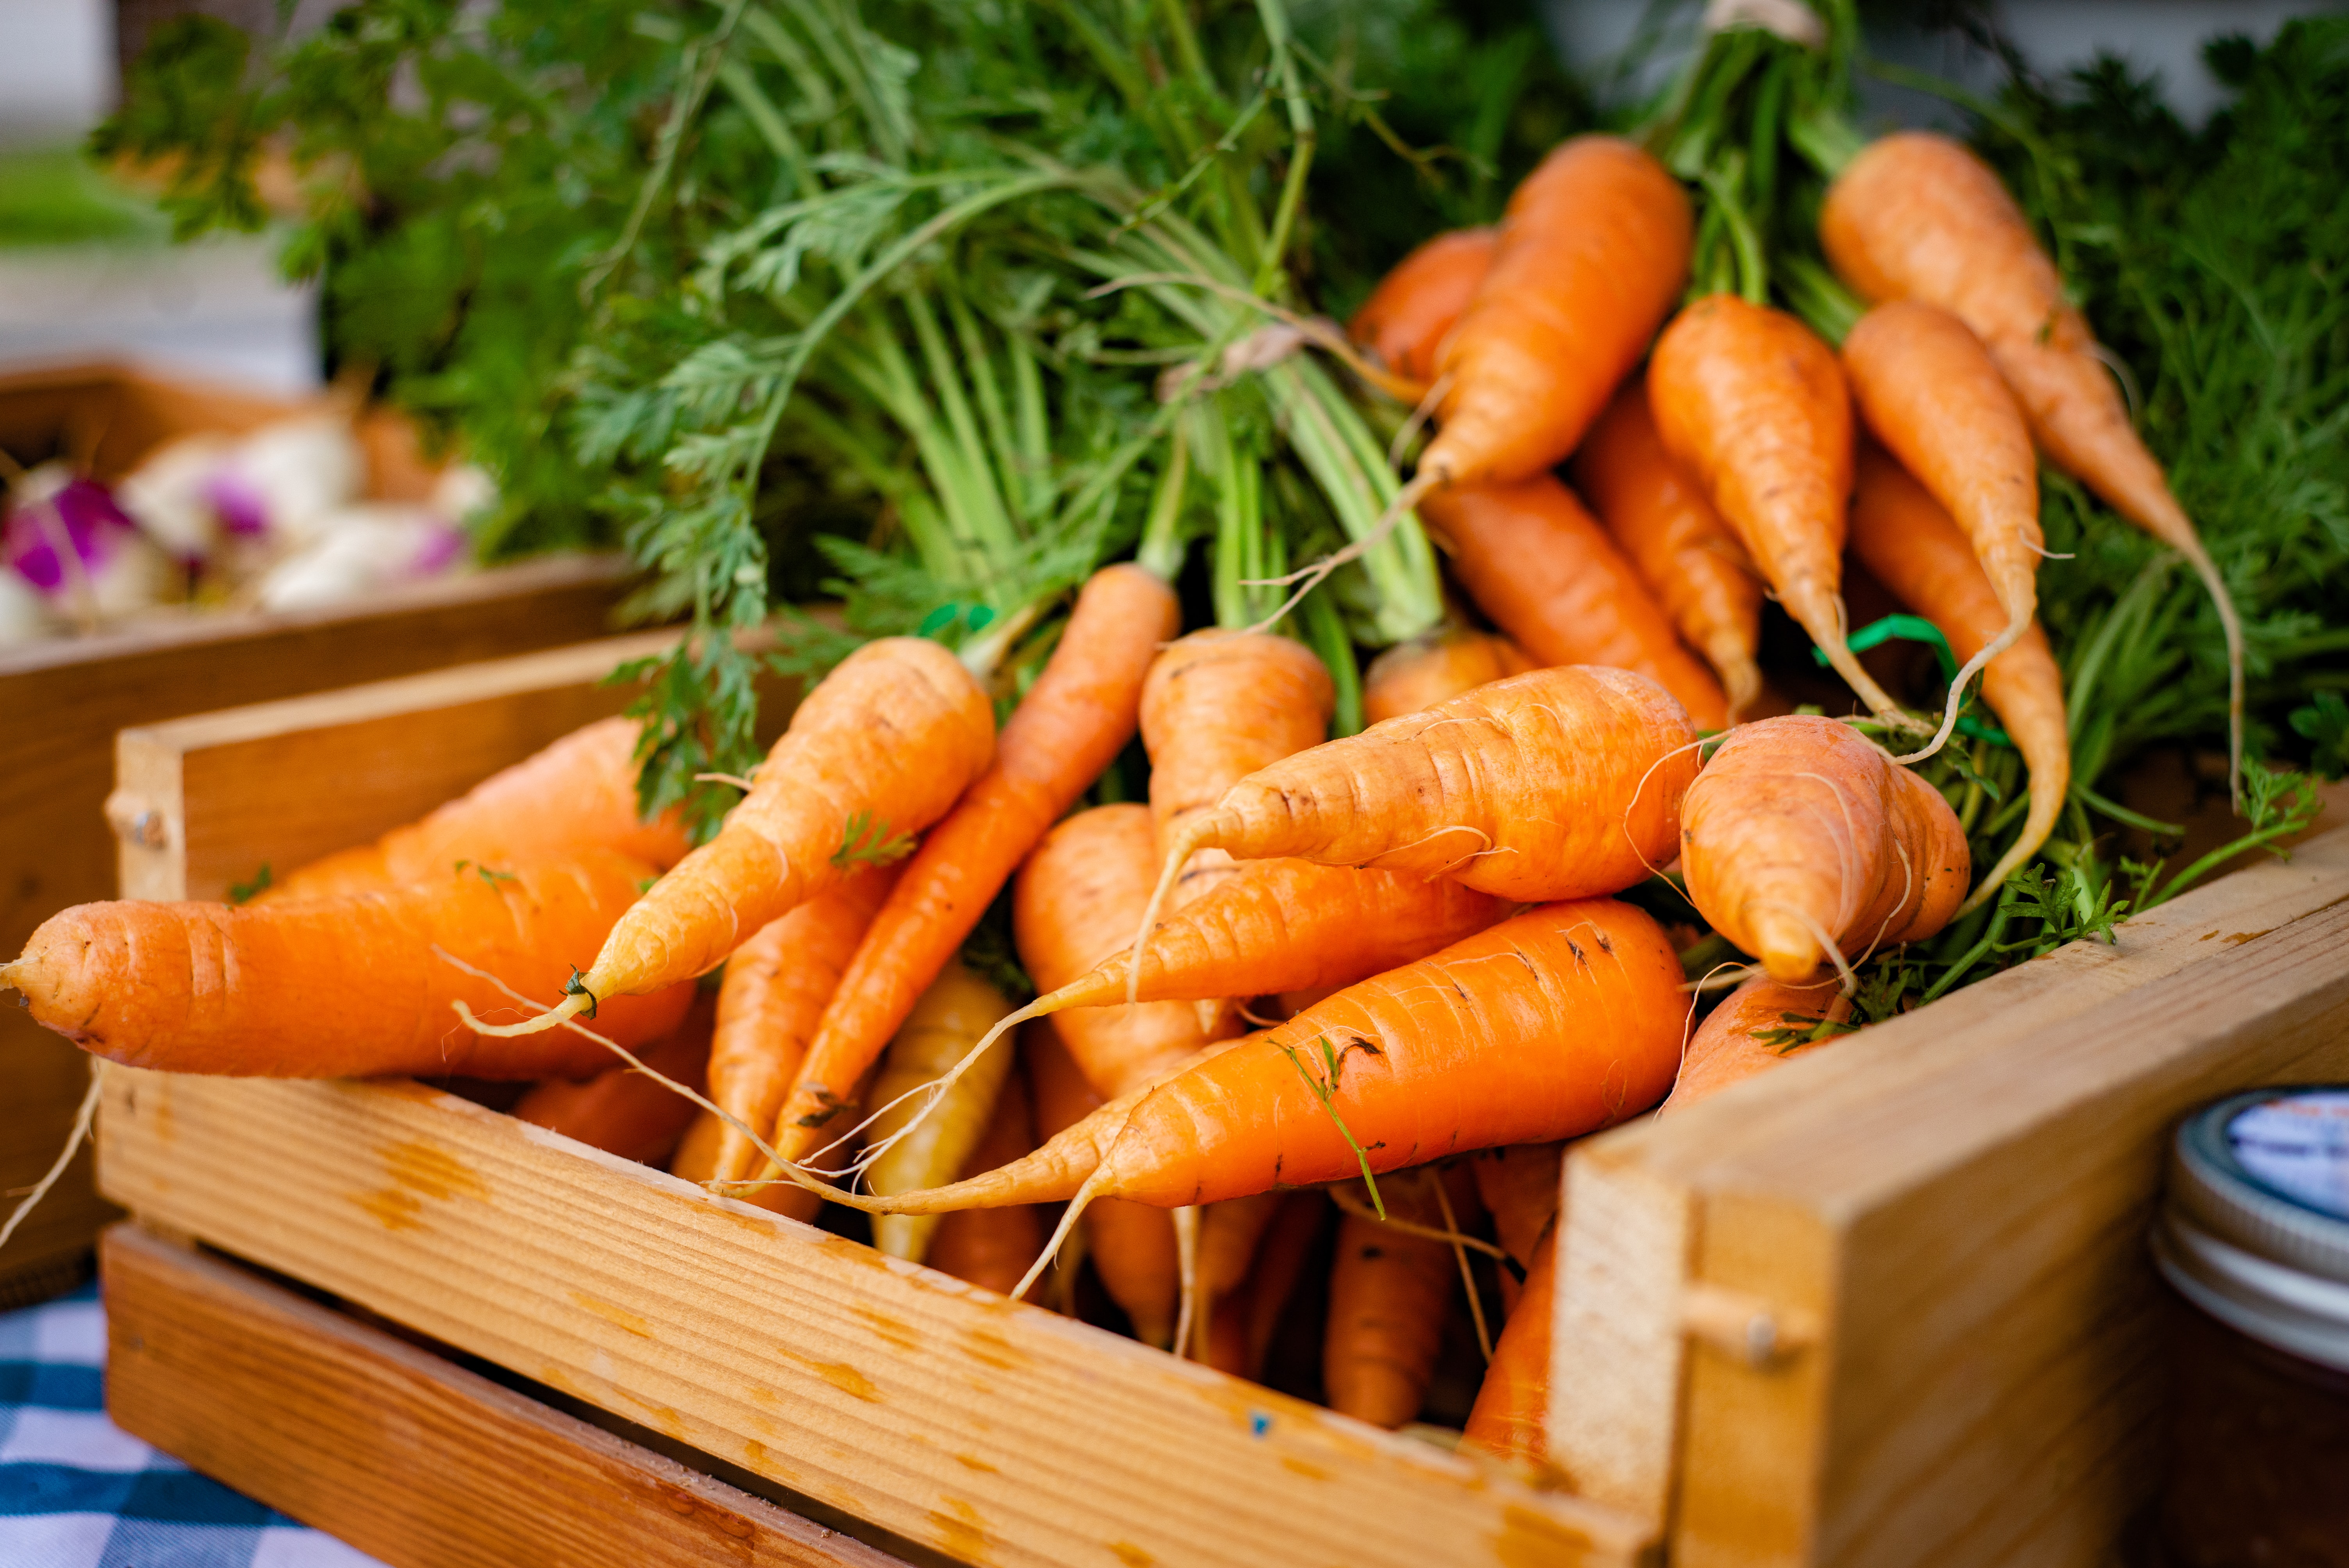 Carrots in a wooden crate